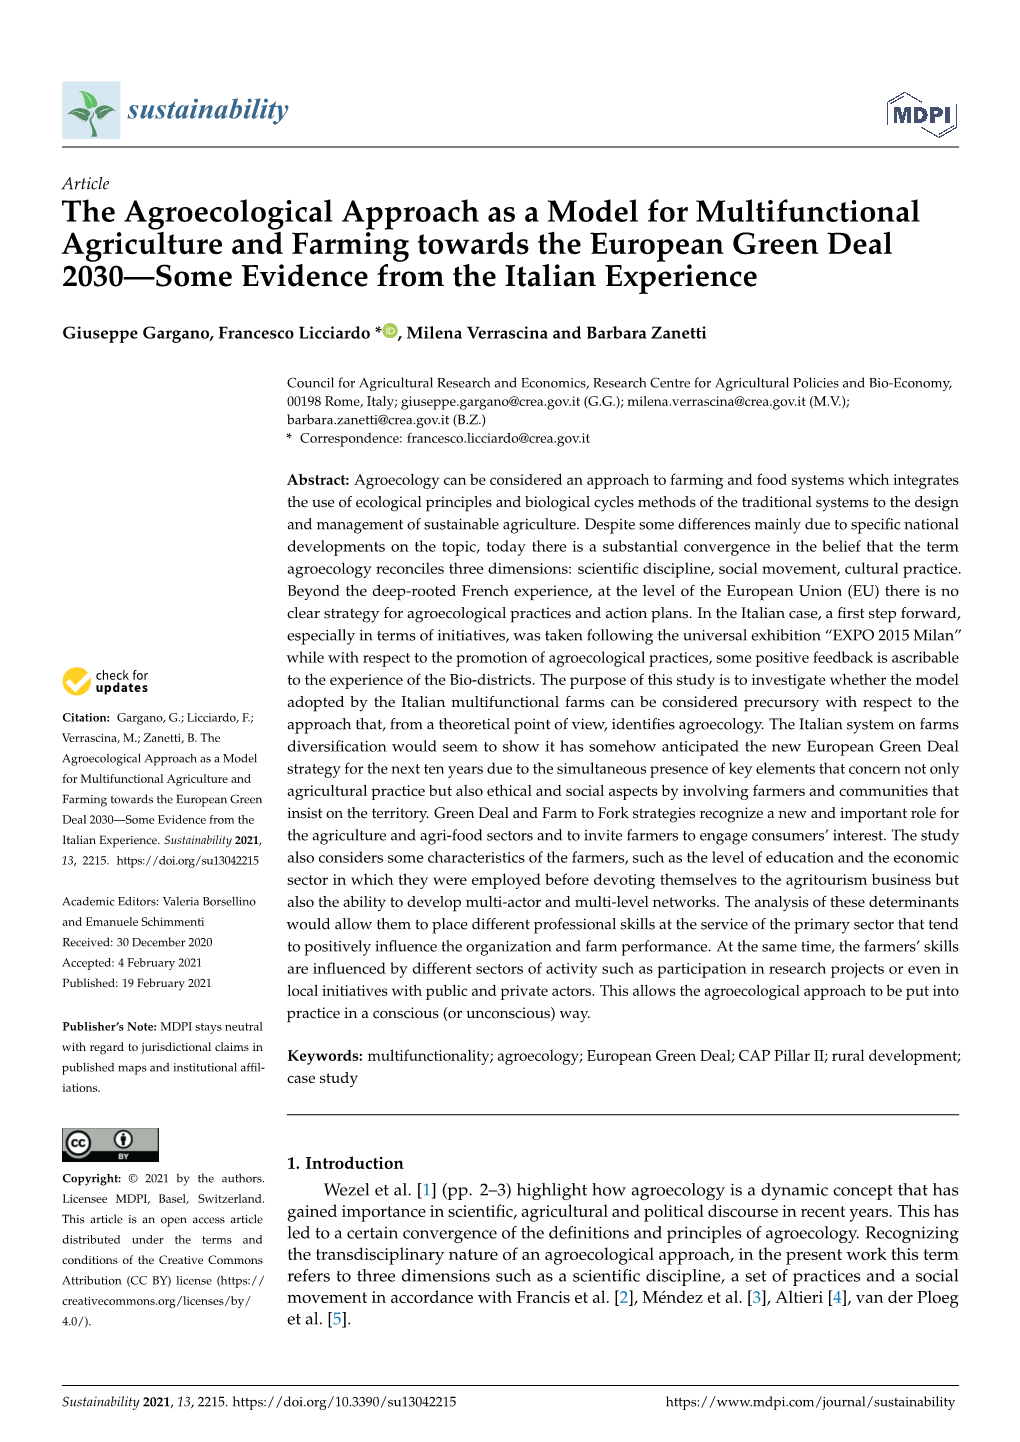 The Agroecological Approach As a Model for Multifunctional Agriculture and Farming Towards the European Green Deal 2030—Some Evidence from the Italian Experience